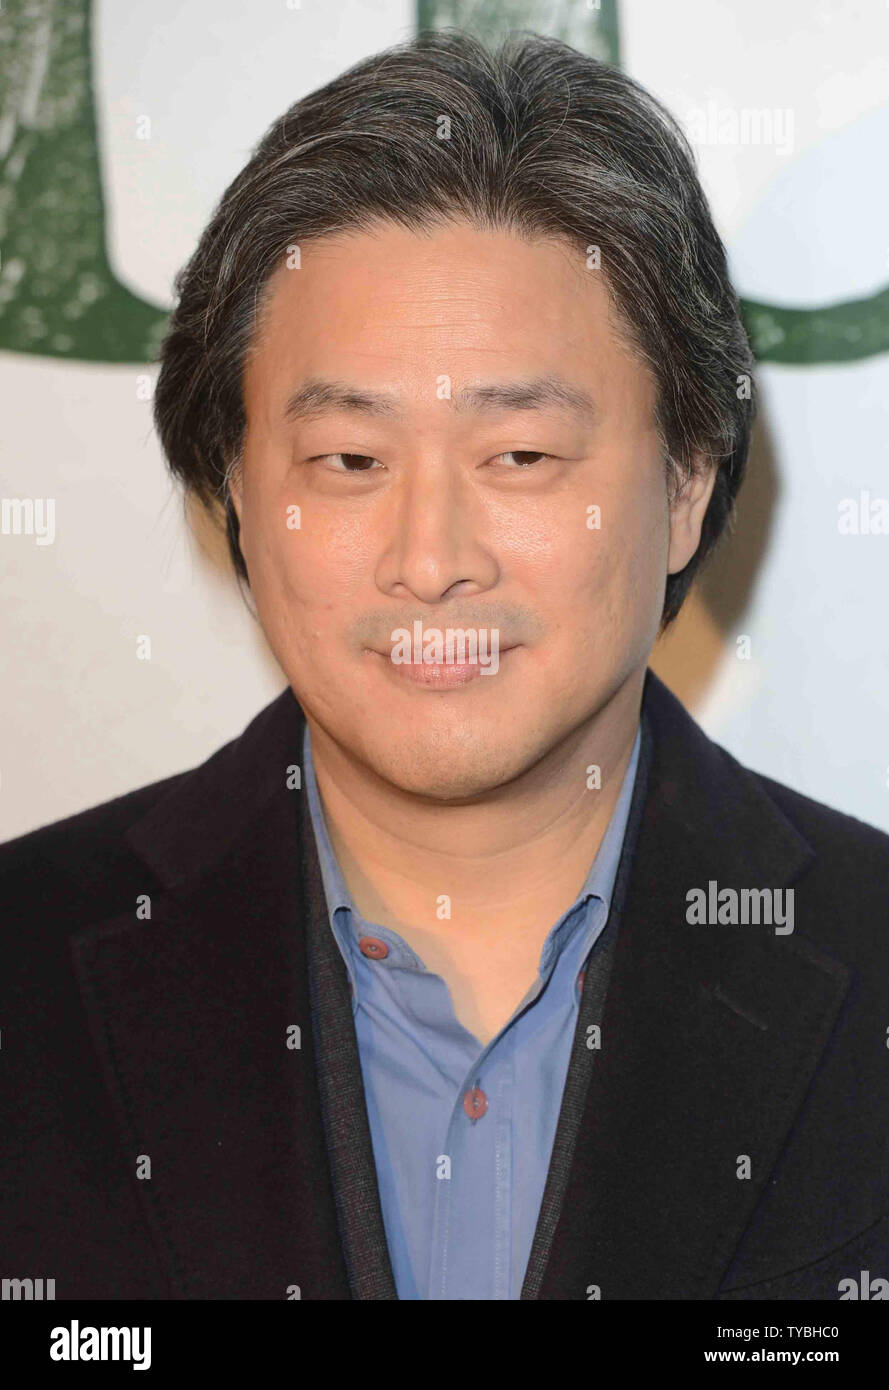 South Korean film director Park Chan-Wook attends a special screening of 'Stoker' at The Curzon Soho in London on February 17, 2013.     UPI/Paul Treadway Stock Photo